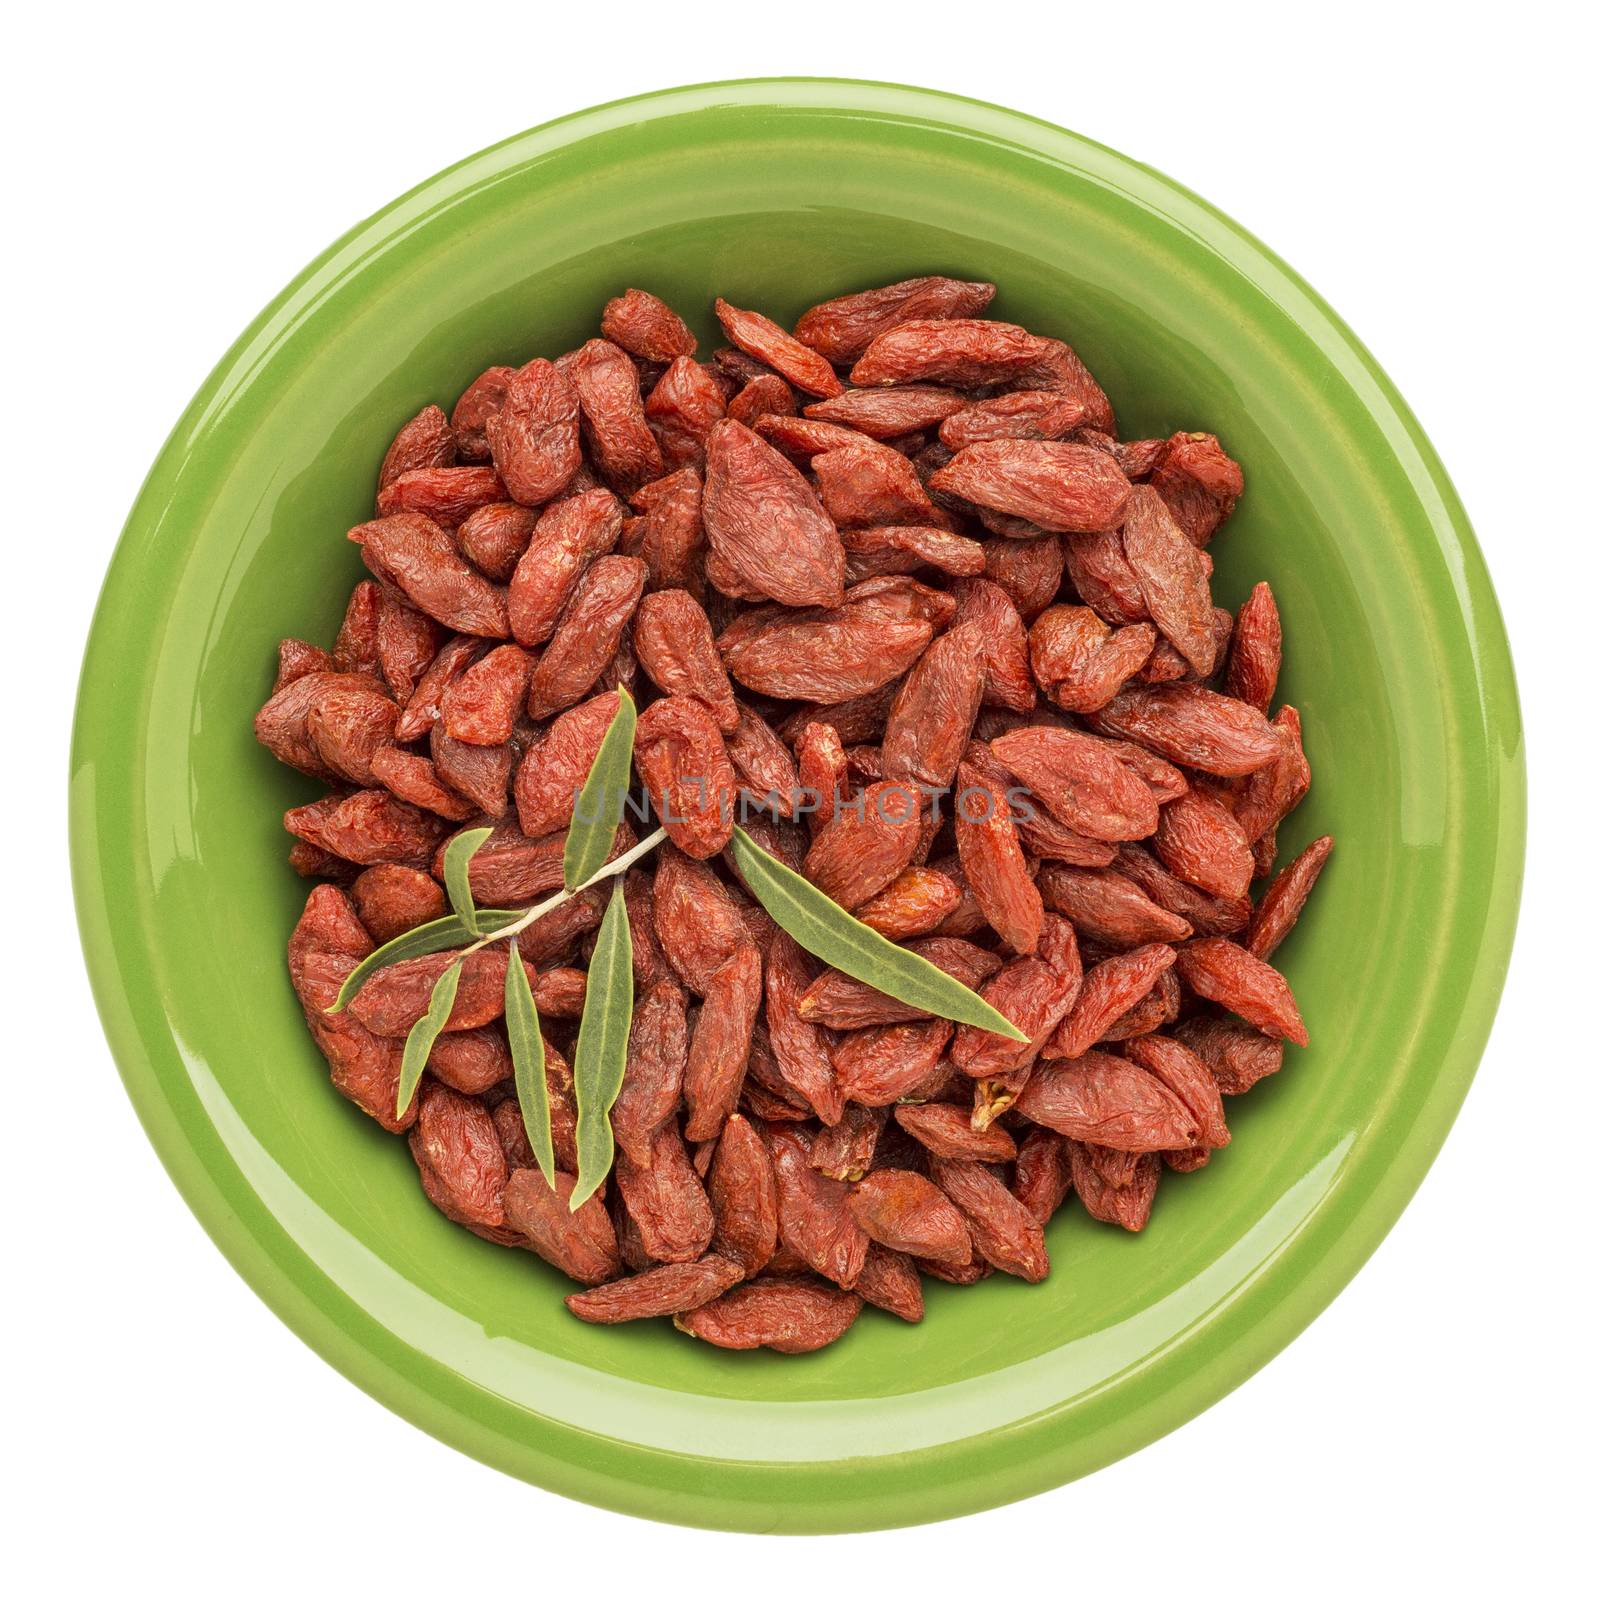 dried goji berries with a fresh leaf on an isolated green ceramic bowl